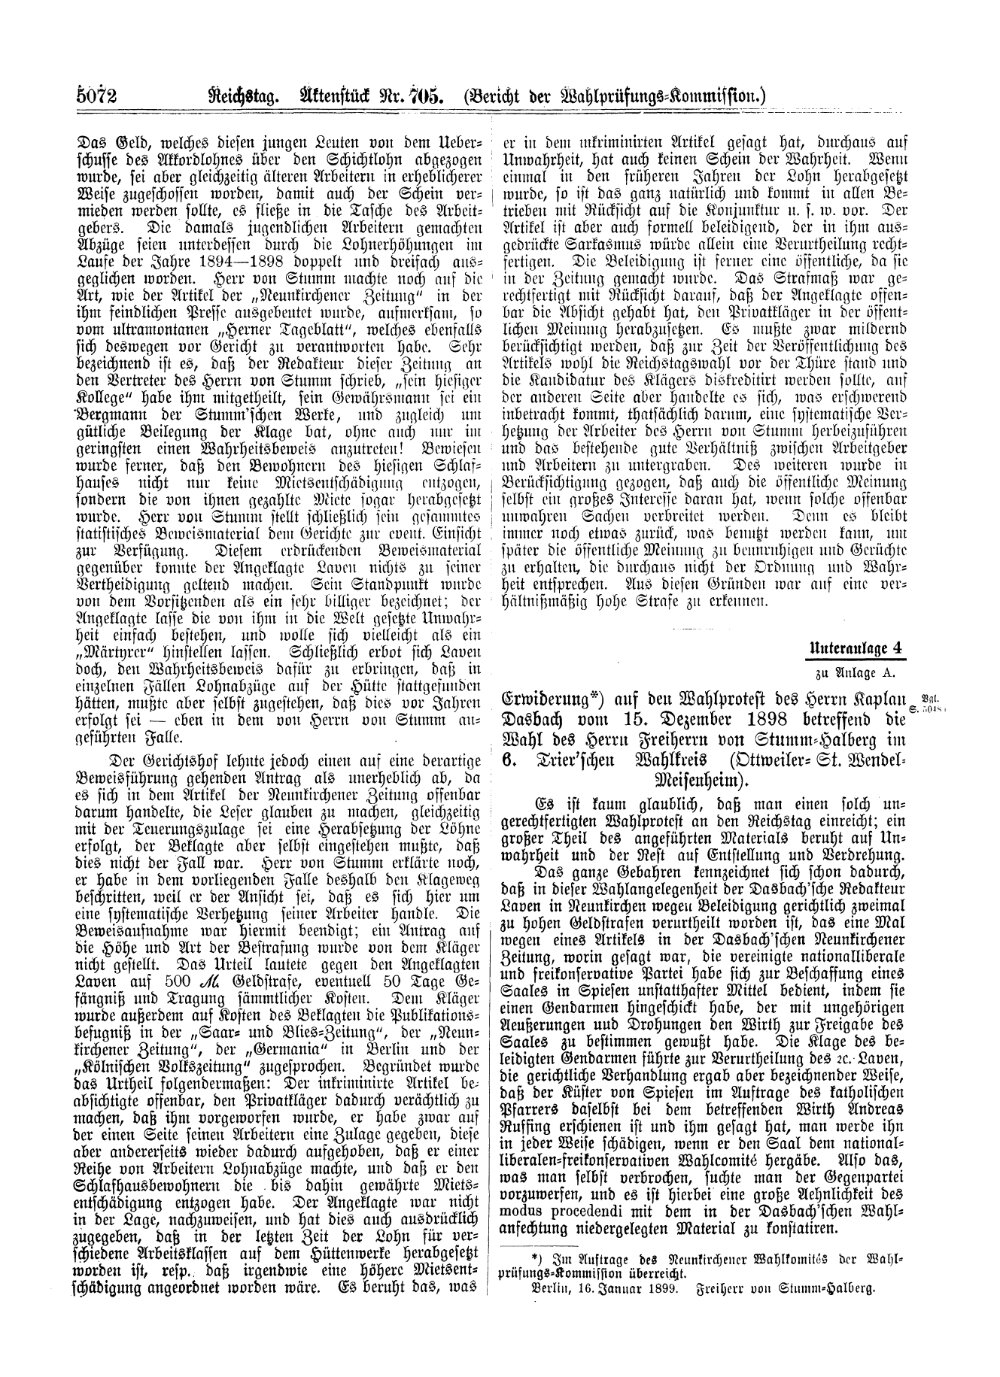 Scan of page 5072